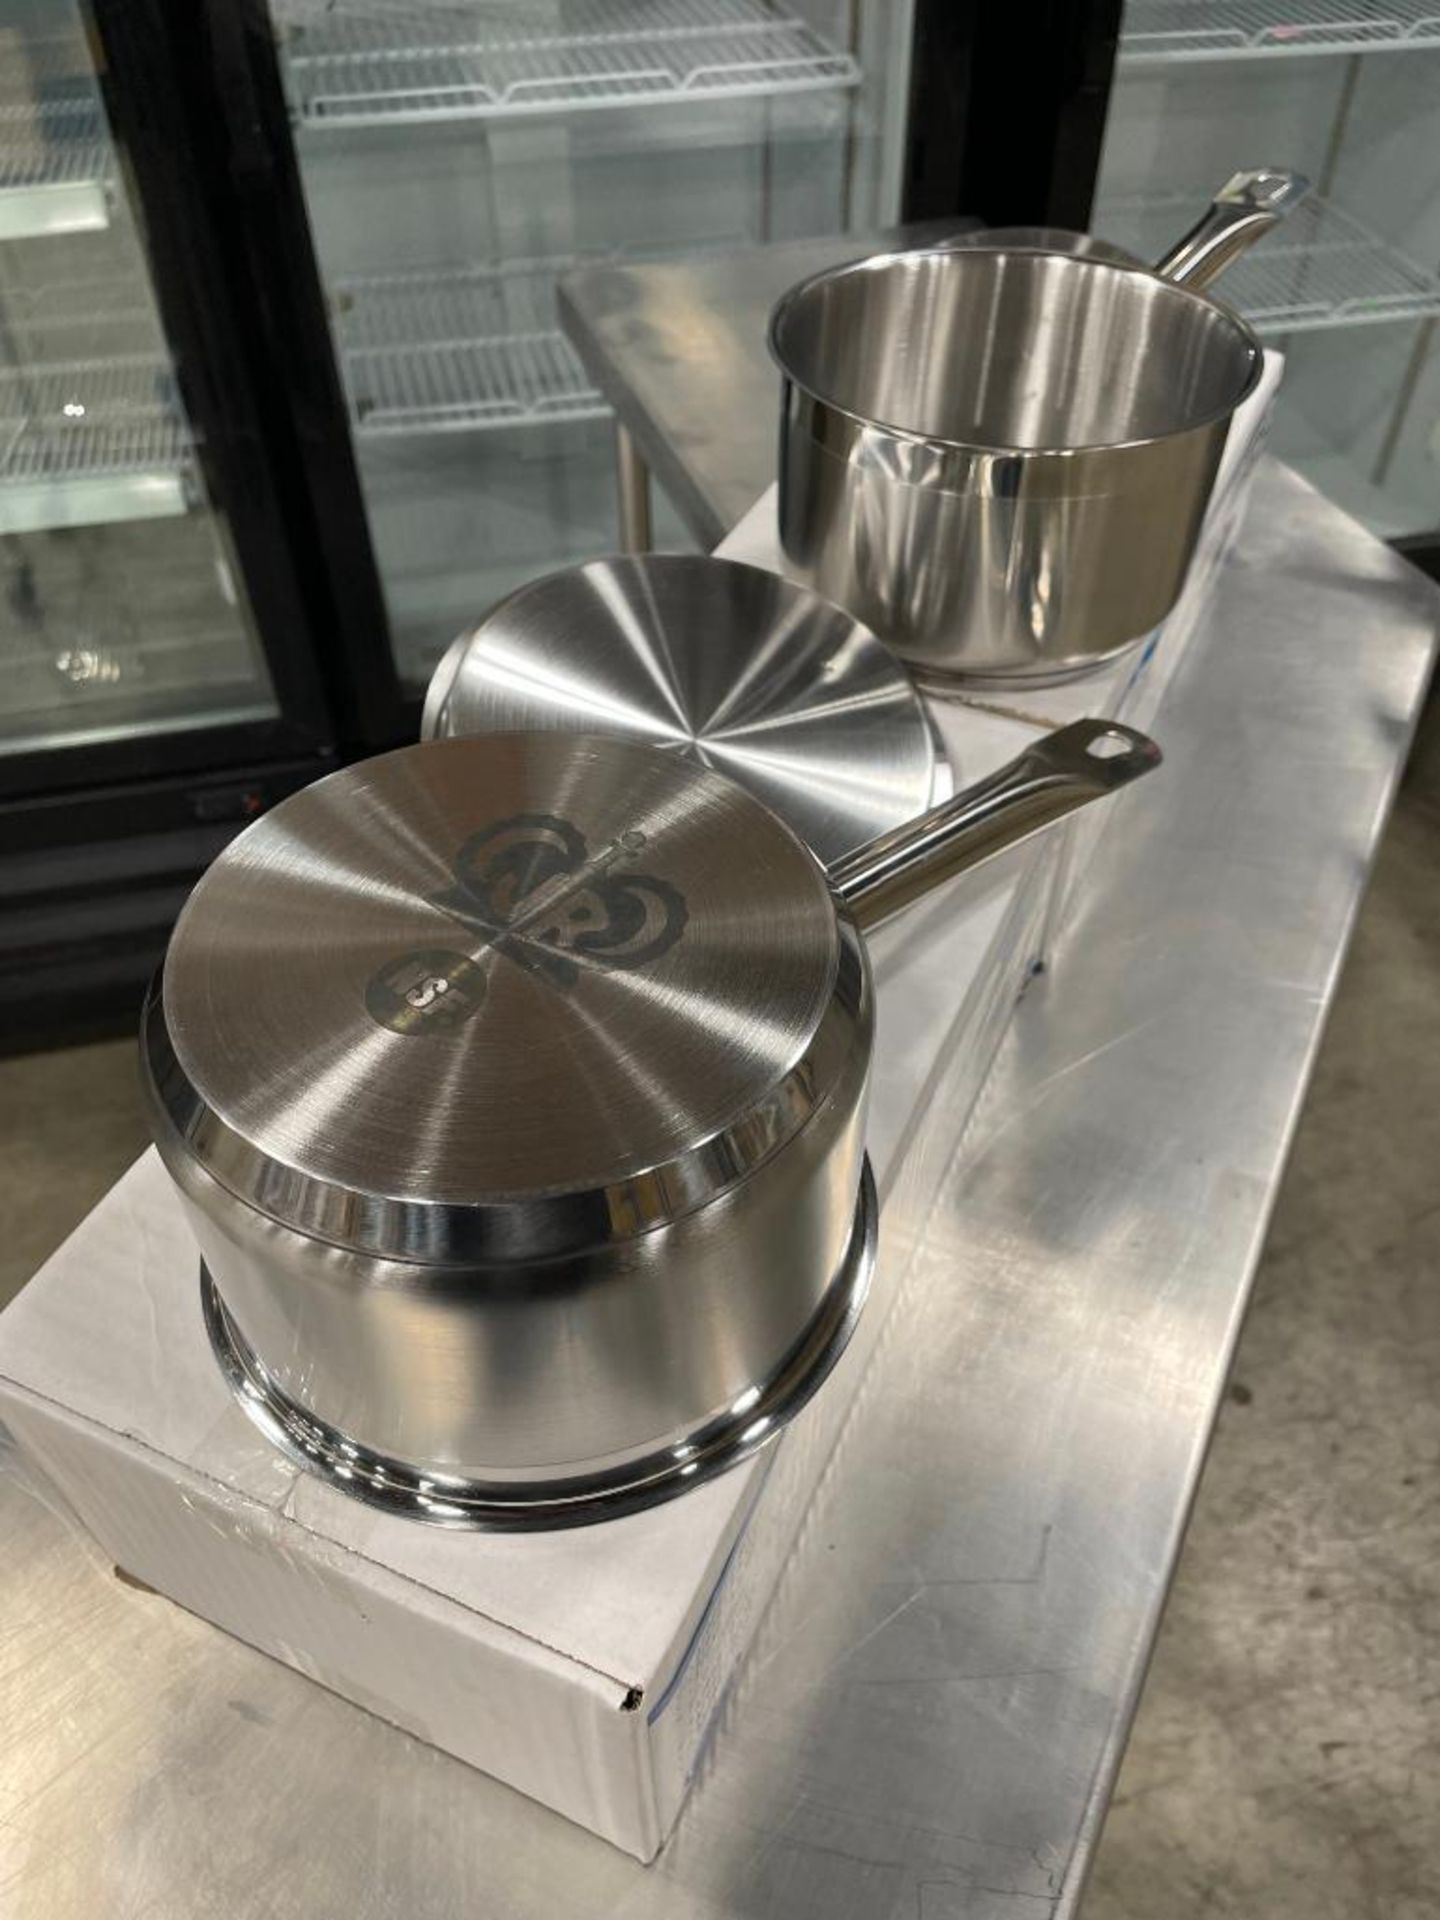 (2) 2QT HEAVY DUTY STAINLESS SAUCE PAN SET INDUCTION CAPABLE, JR 47622 - NEW - Image 7 of 7